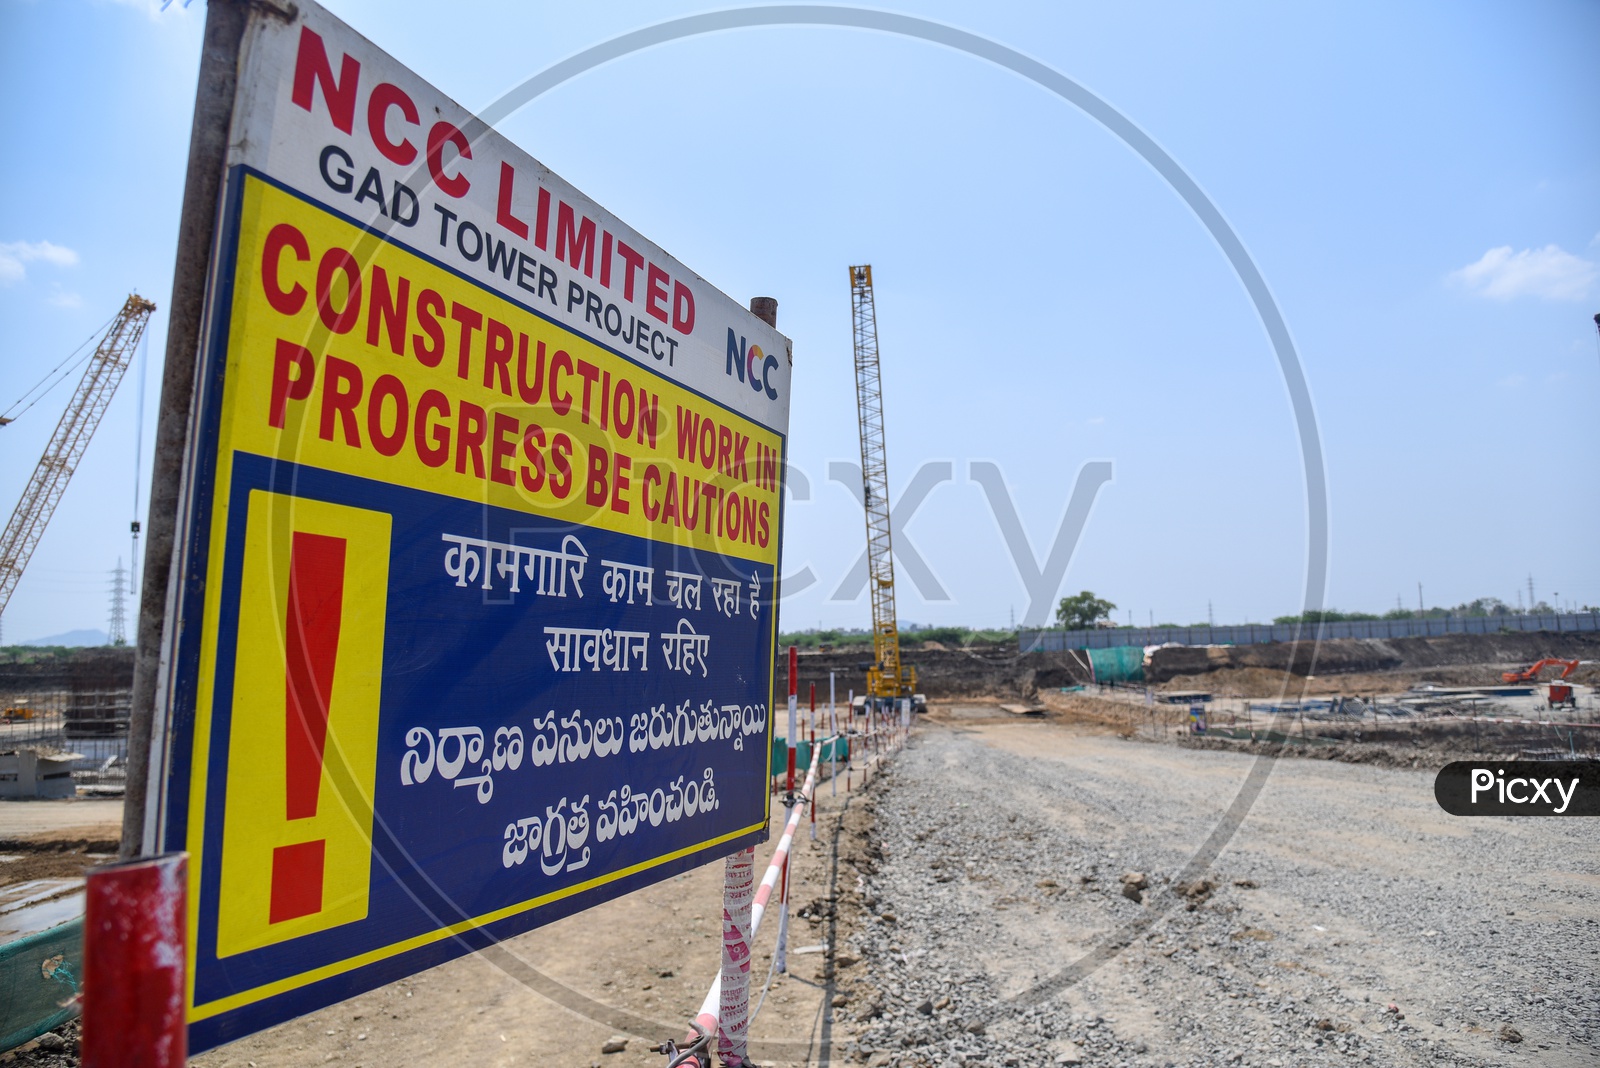 Caution Boards by Construction Company At Working Sites